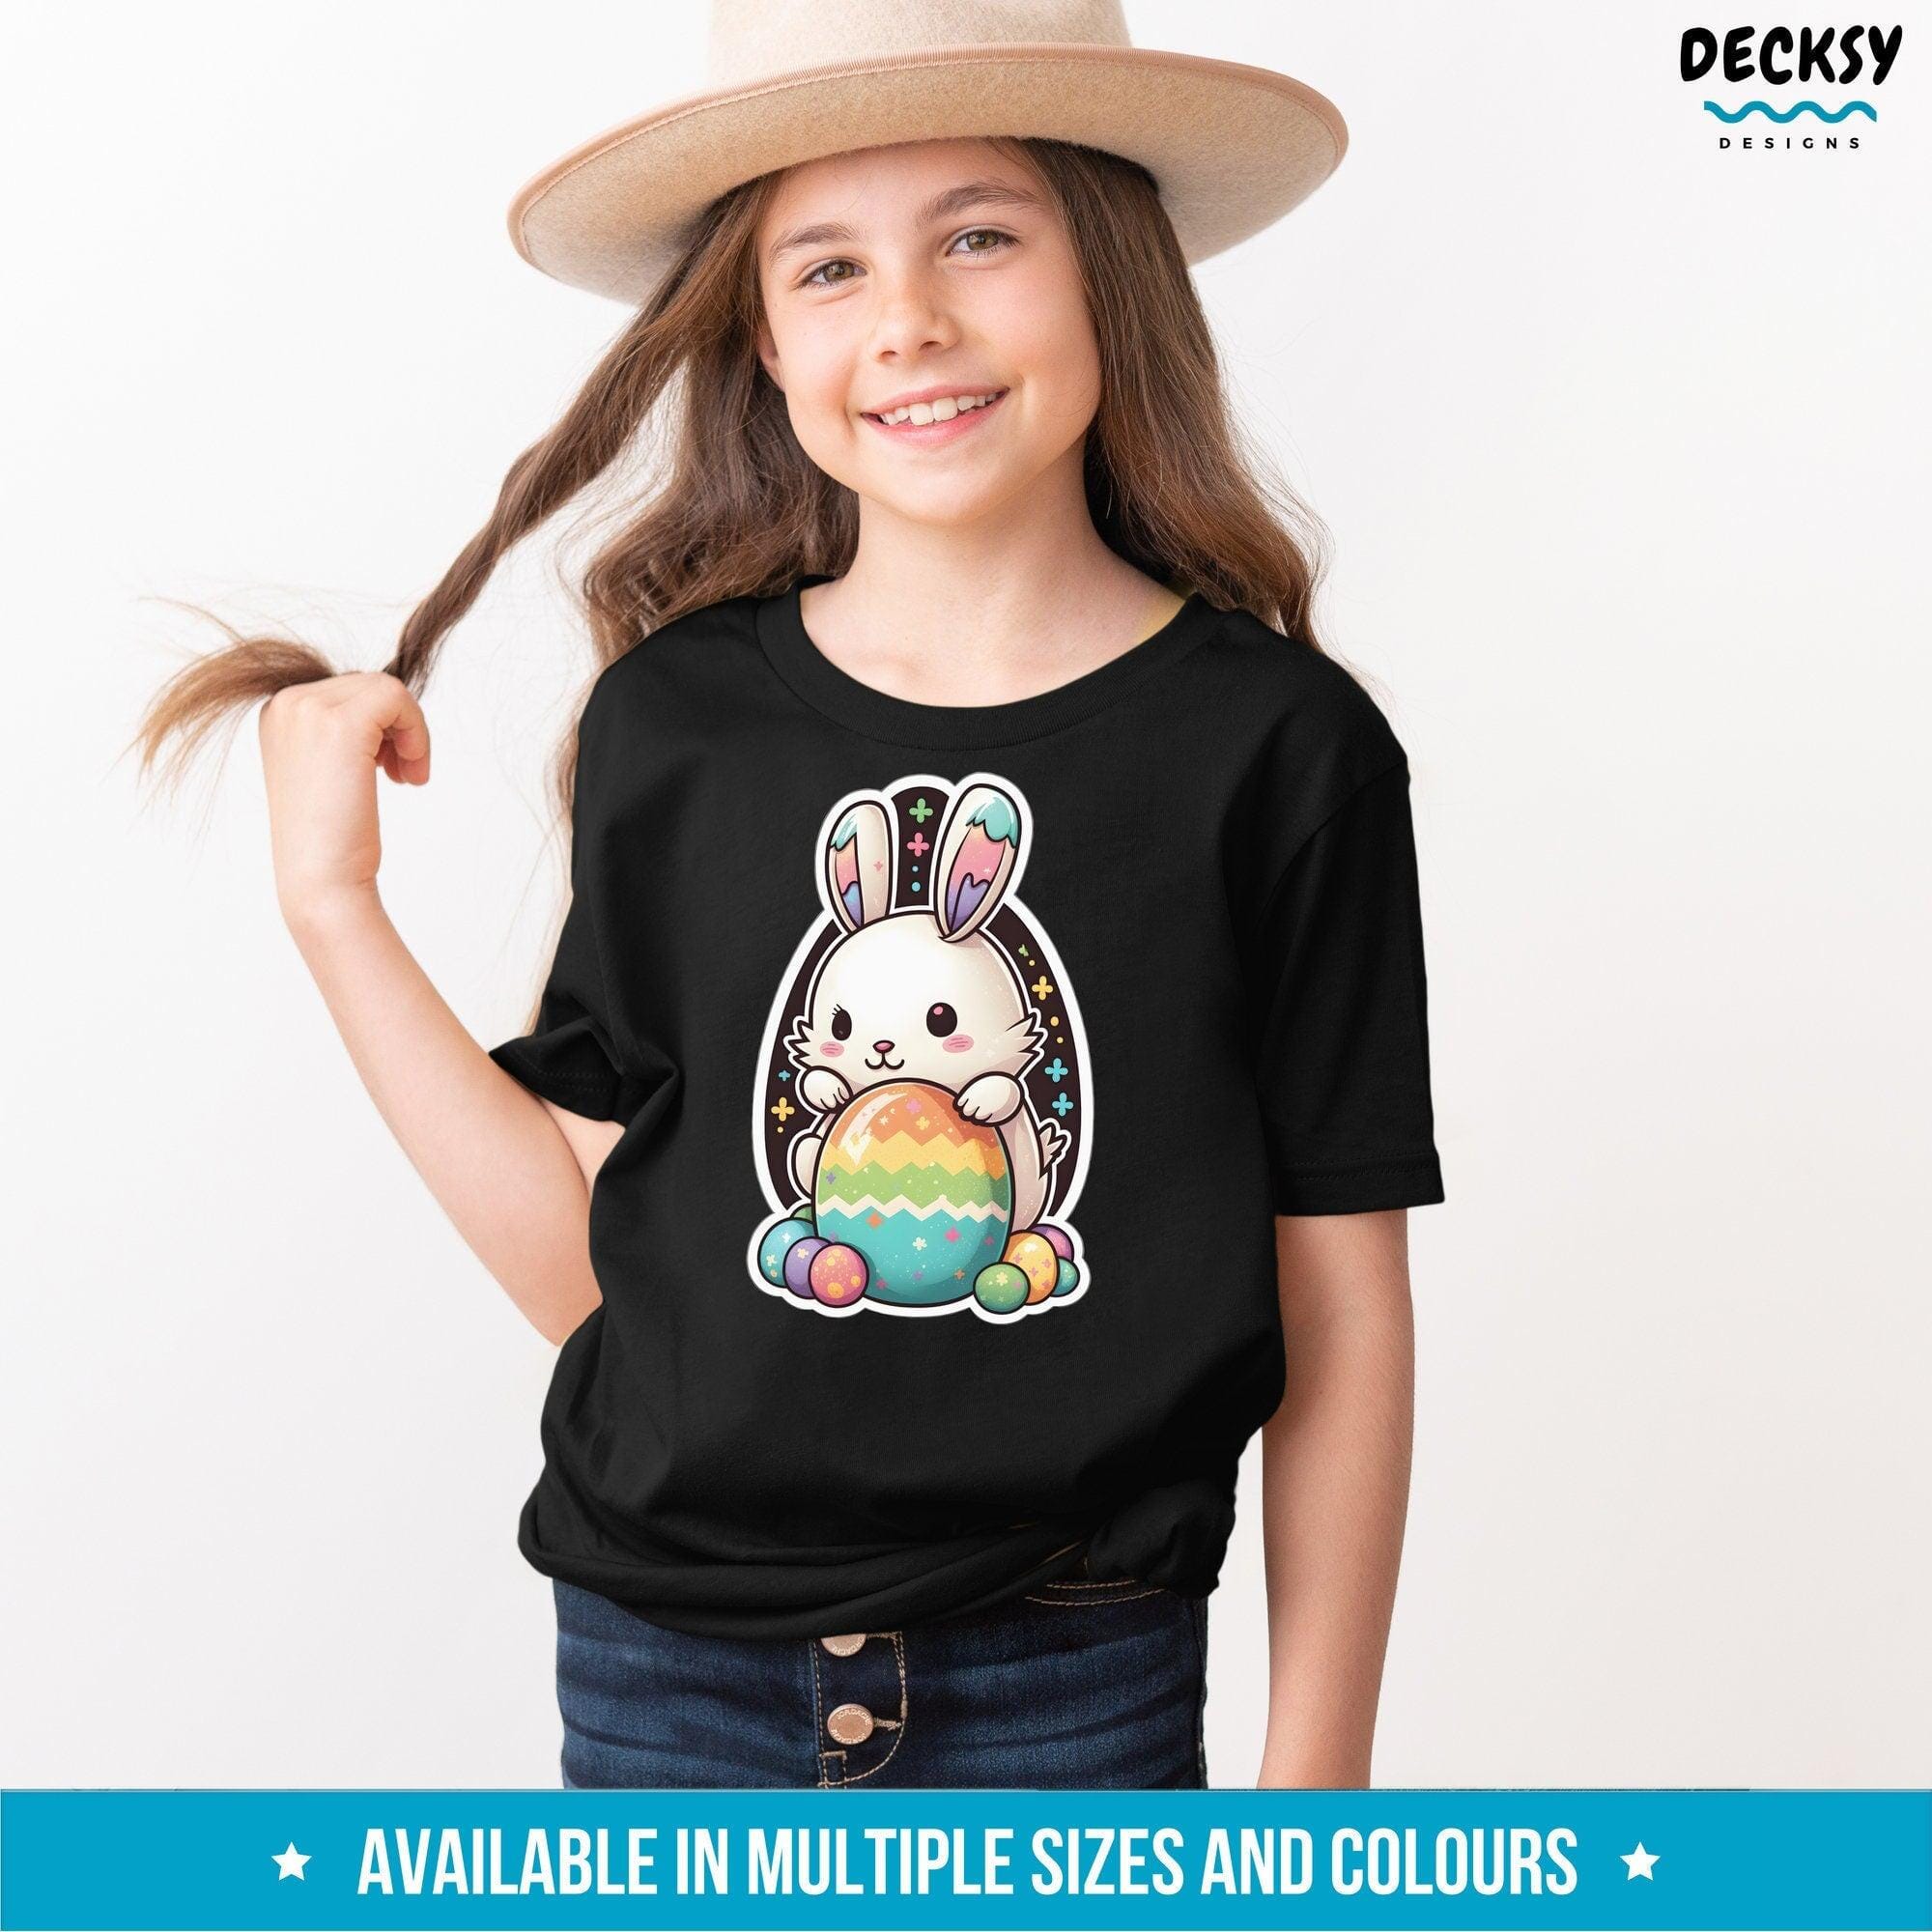 Adorable Easter Shirt, Bunny Lover Gift For Boys and Girls-Clothing:Gender-Neutral Adult Clothing:Tops & Tees:T-shirts:Graphic Tees-DecksyDesigns